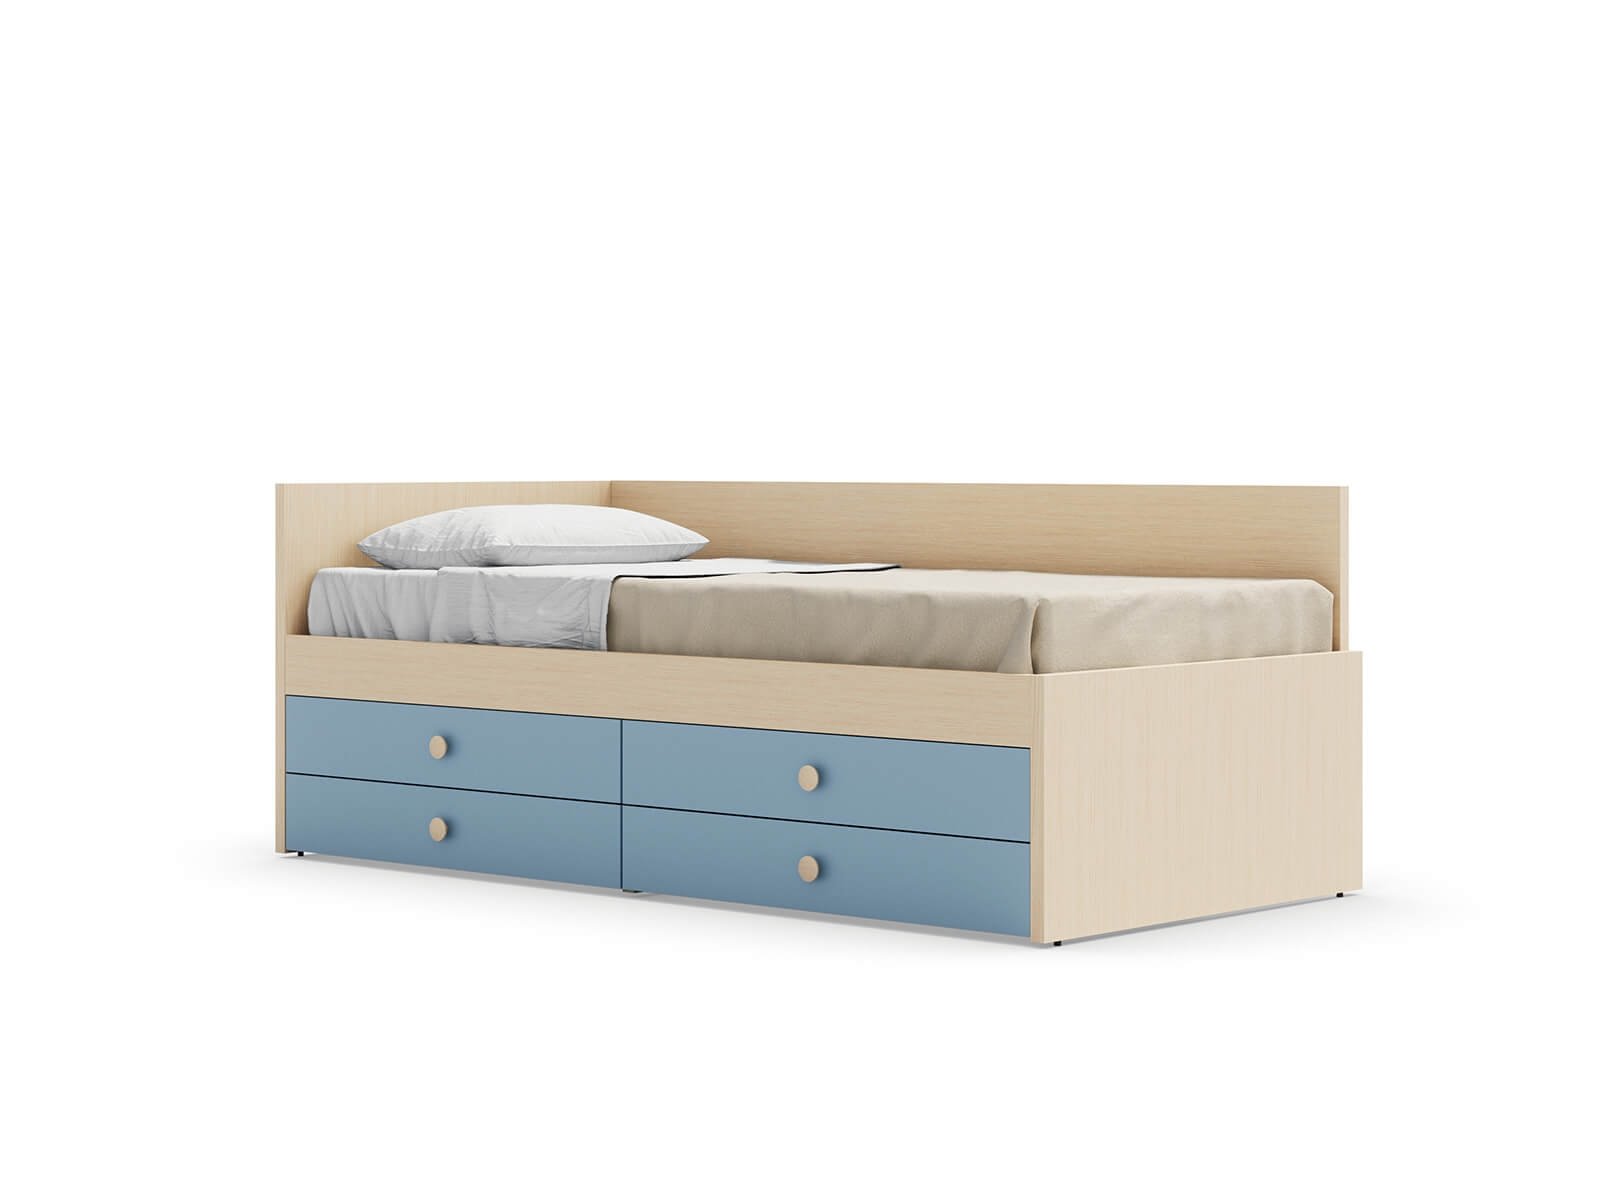 Equipped bed with Nuk back panel